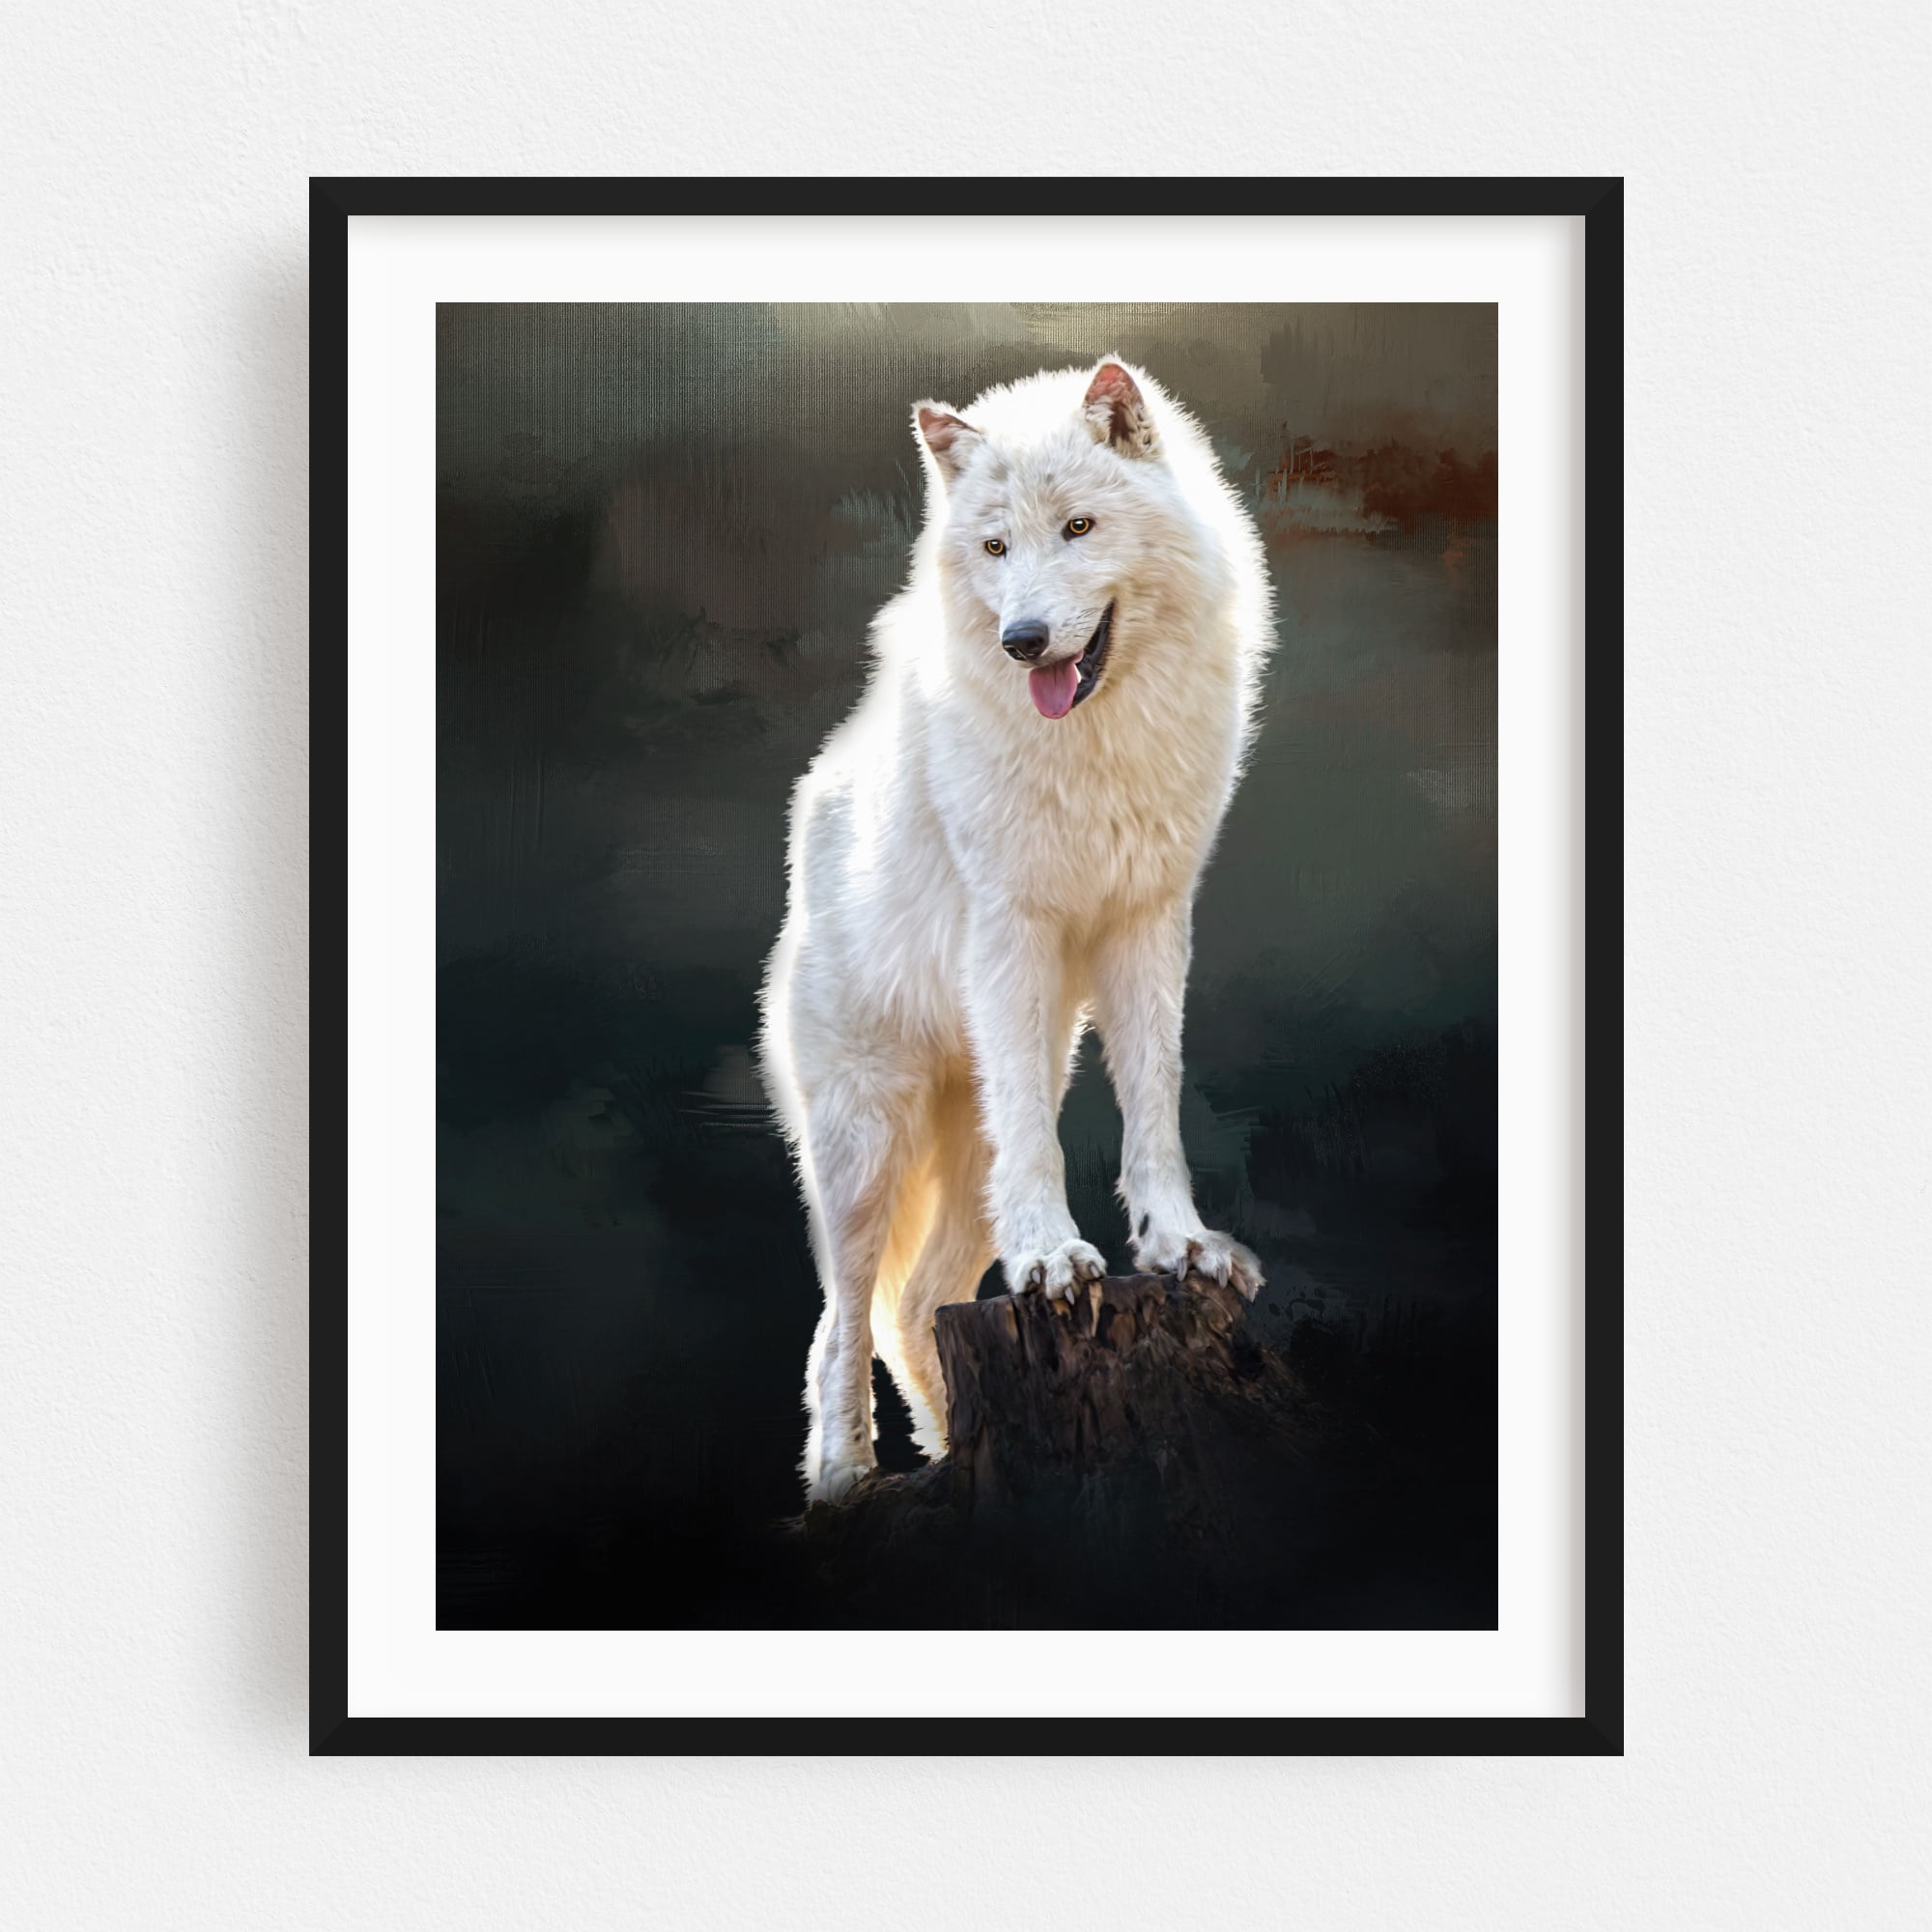 Wolves in Snow Winter Painting Wildlife Animal Wall Decor Art Print Poster 16x20 